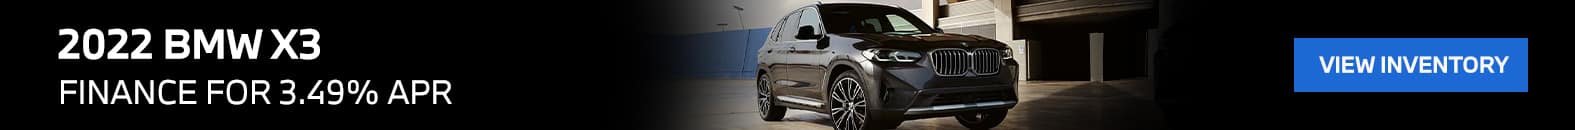 2022 BMW X3-banner-may-22